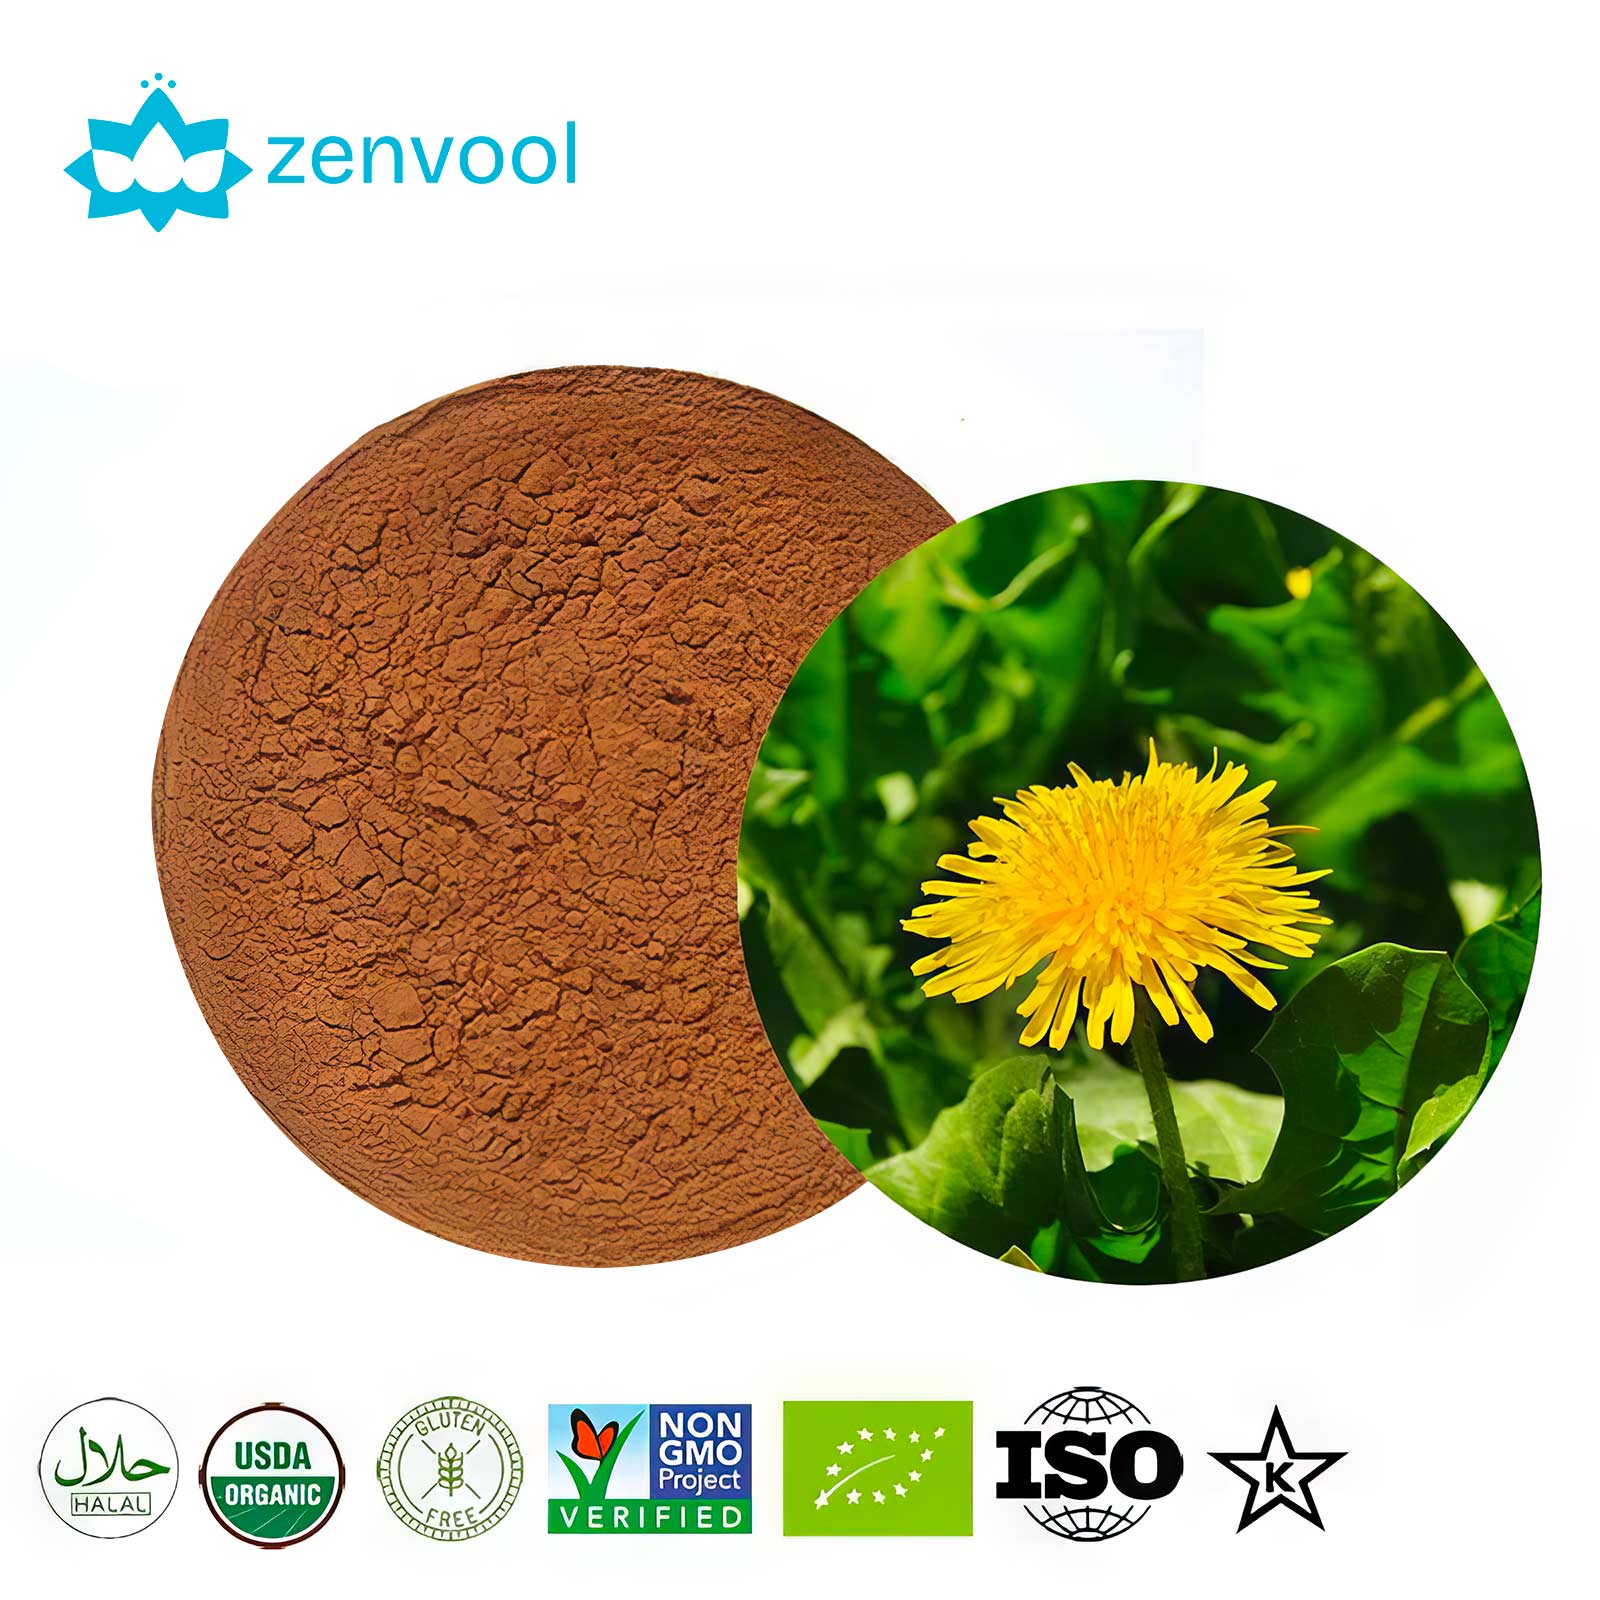 Dandelion Extract / Dandelion Root Extract Powder,Pu Gong Ying Extract Supports Liver, Kidney and Gallbladder